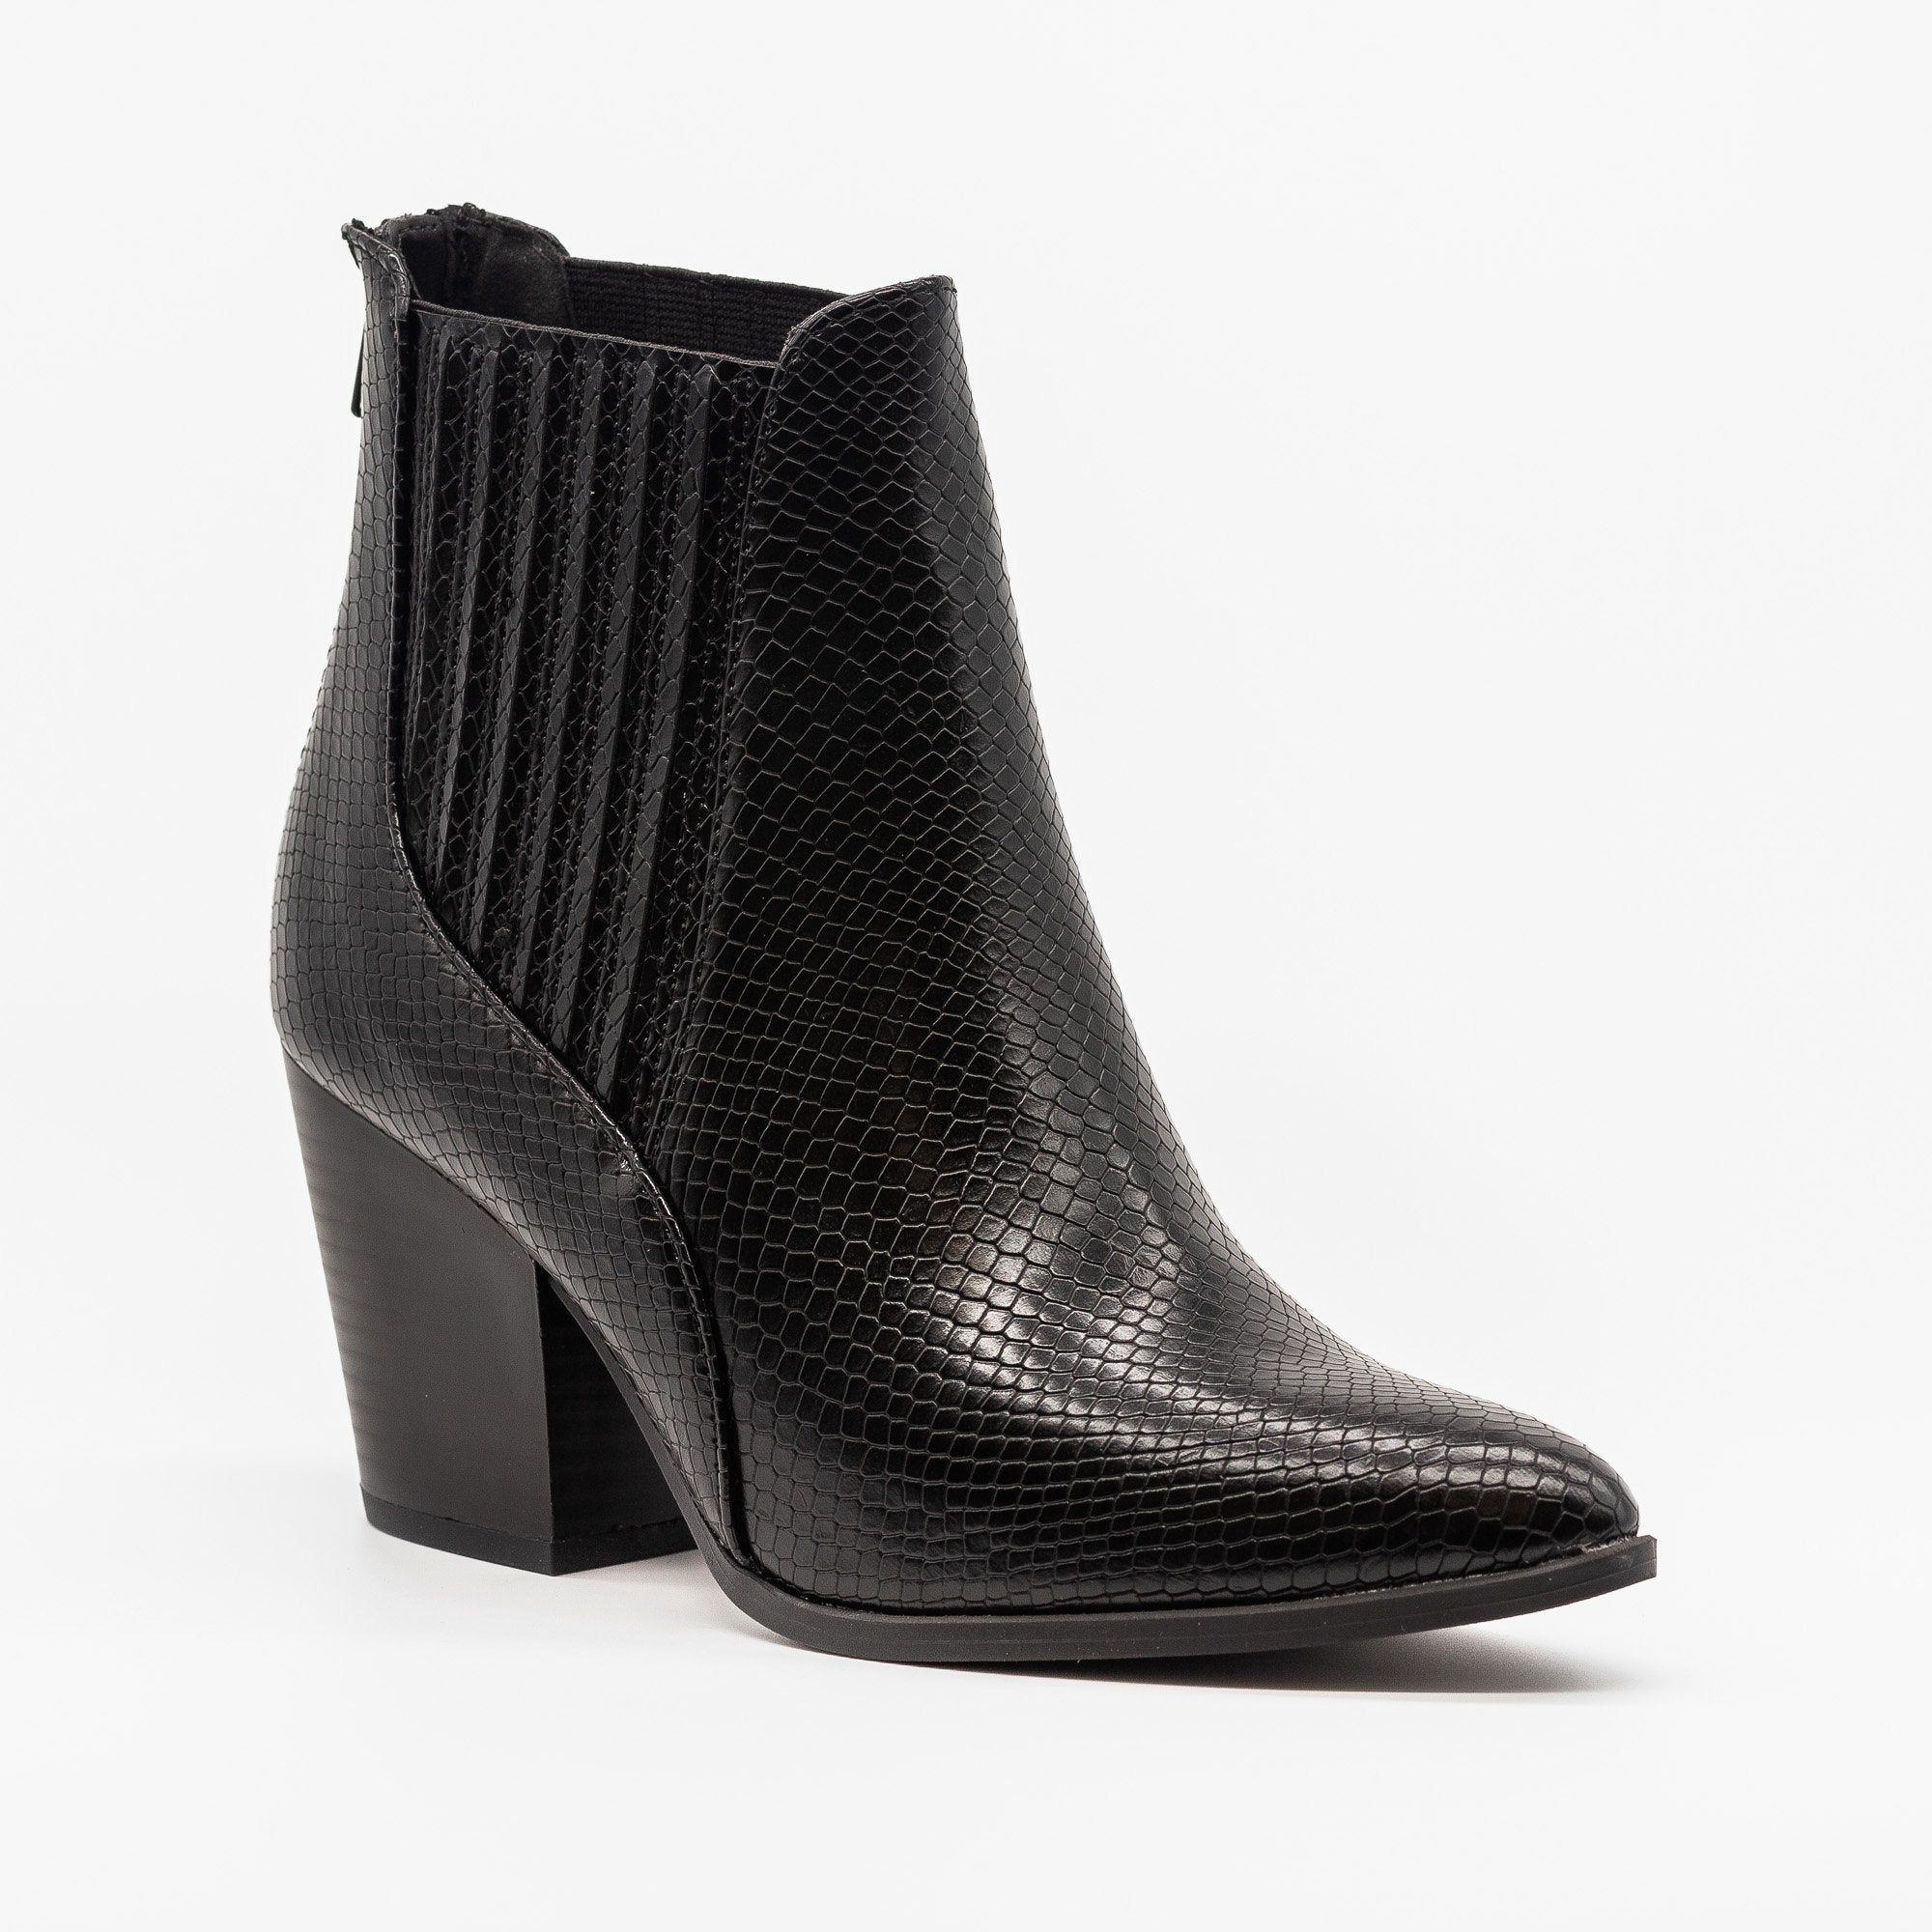 Chic Pointed Toe Snake Skin Booties 